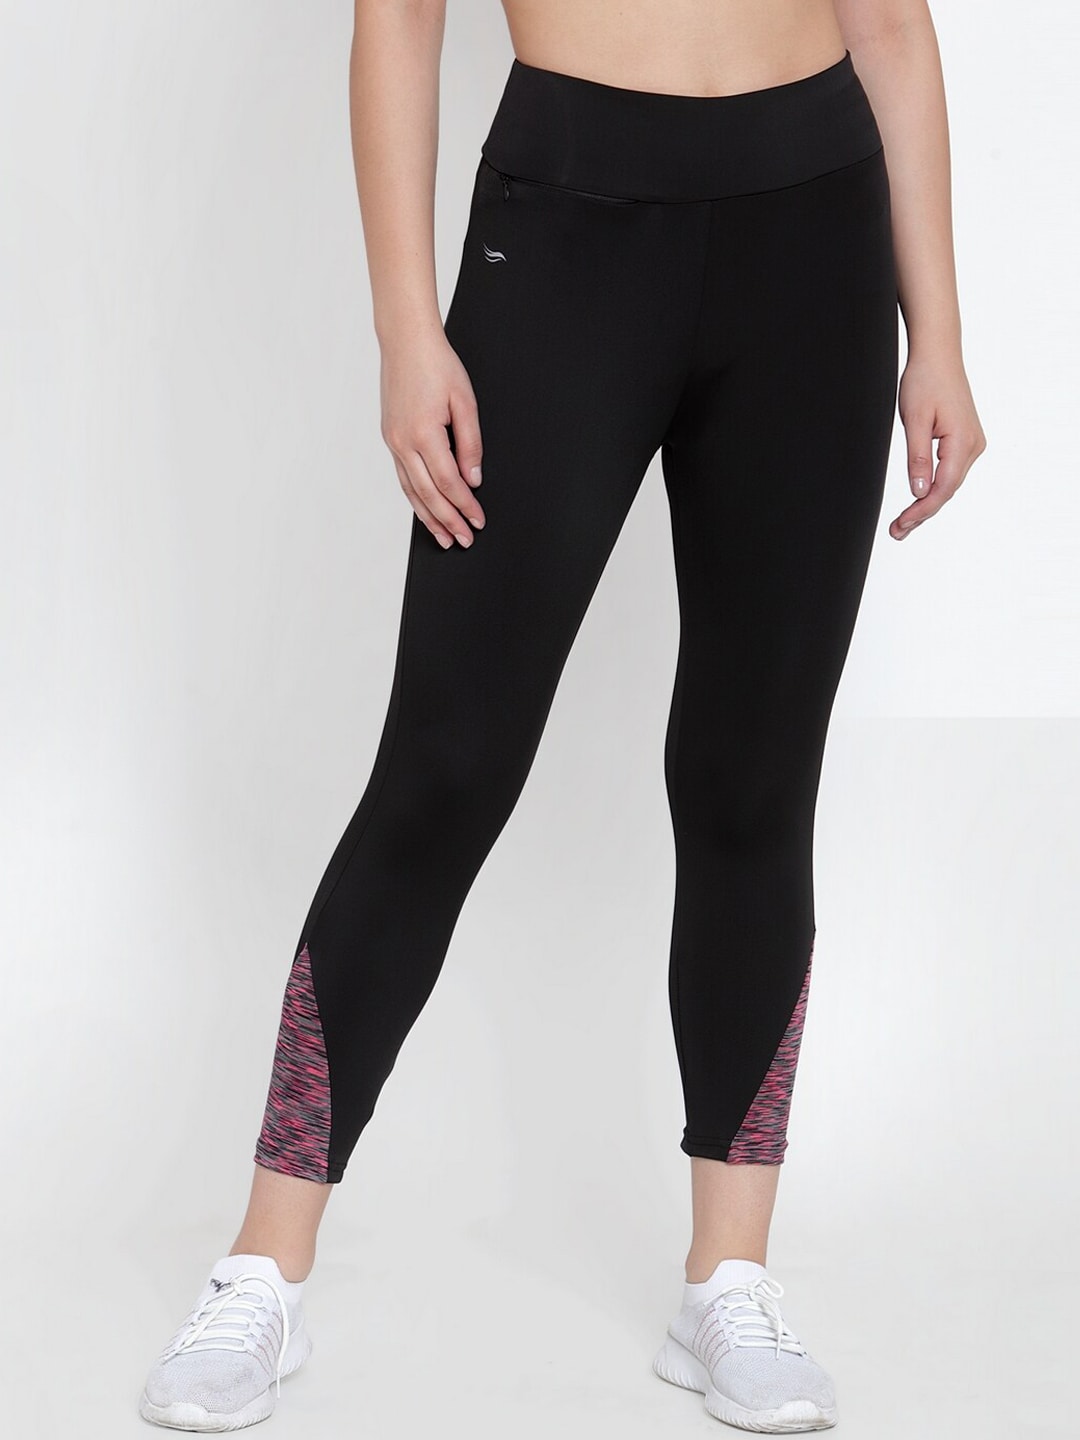 Black & Pink Activewear/Yoga/Gym/Sports Track Pants with Zipped Pocket Price in India